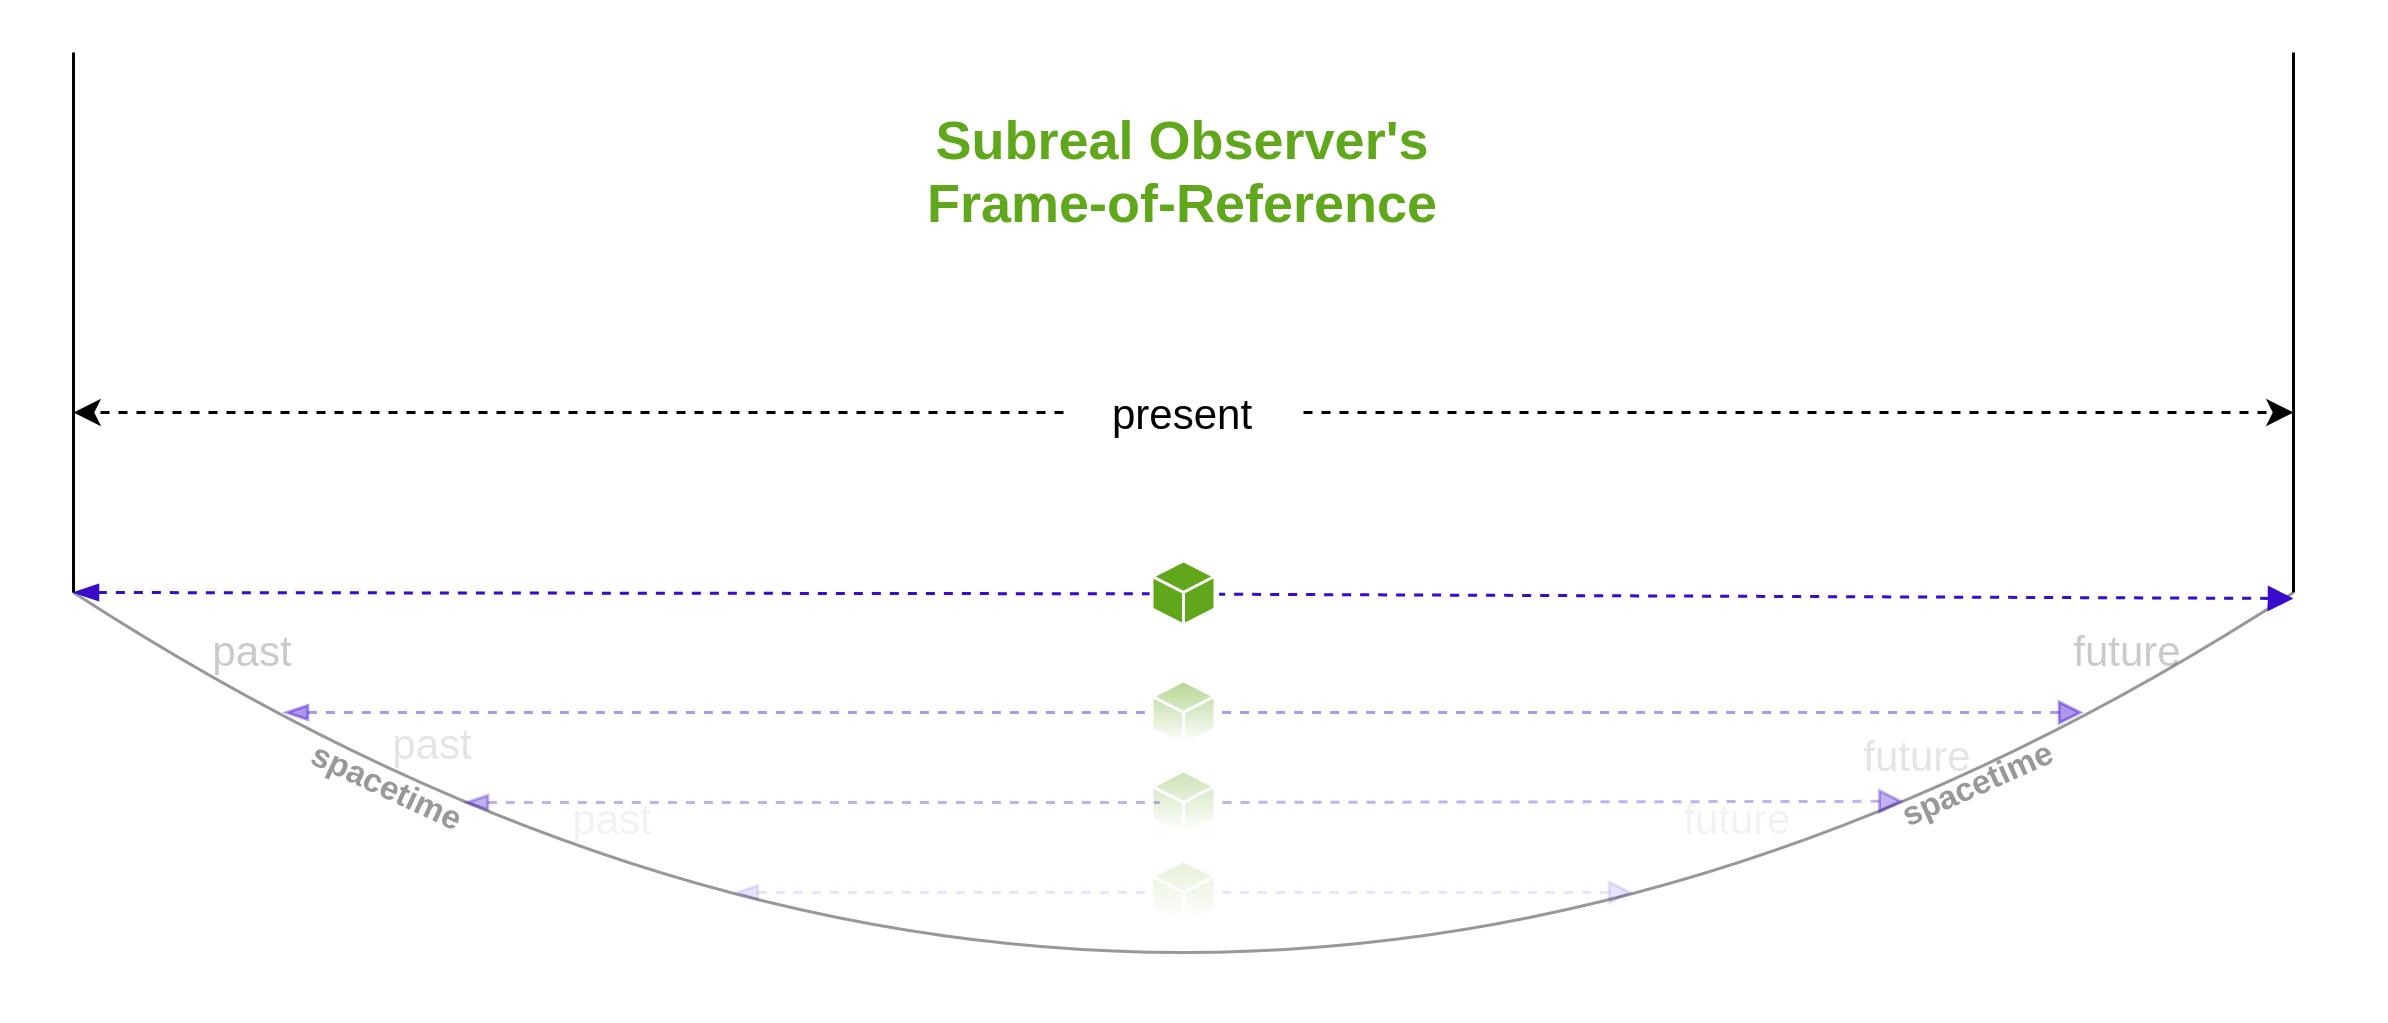 Subreal Observer